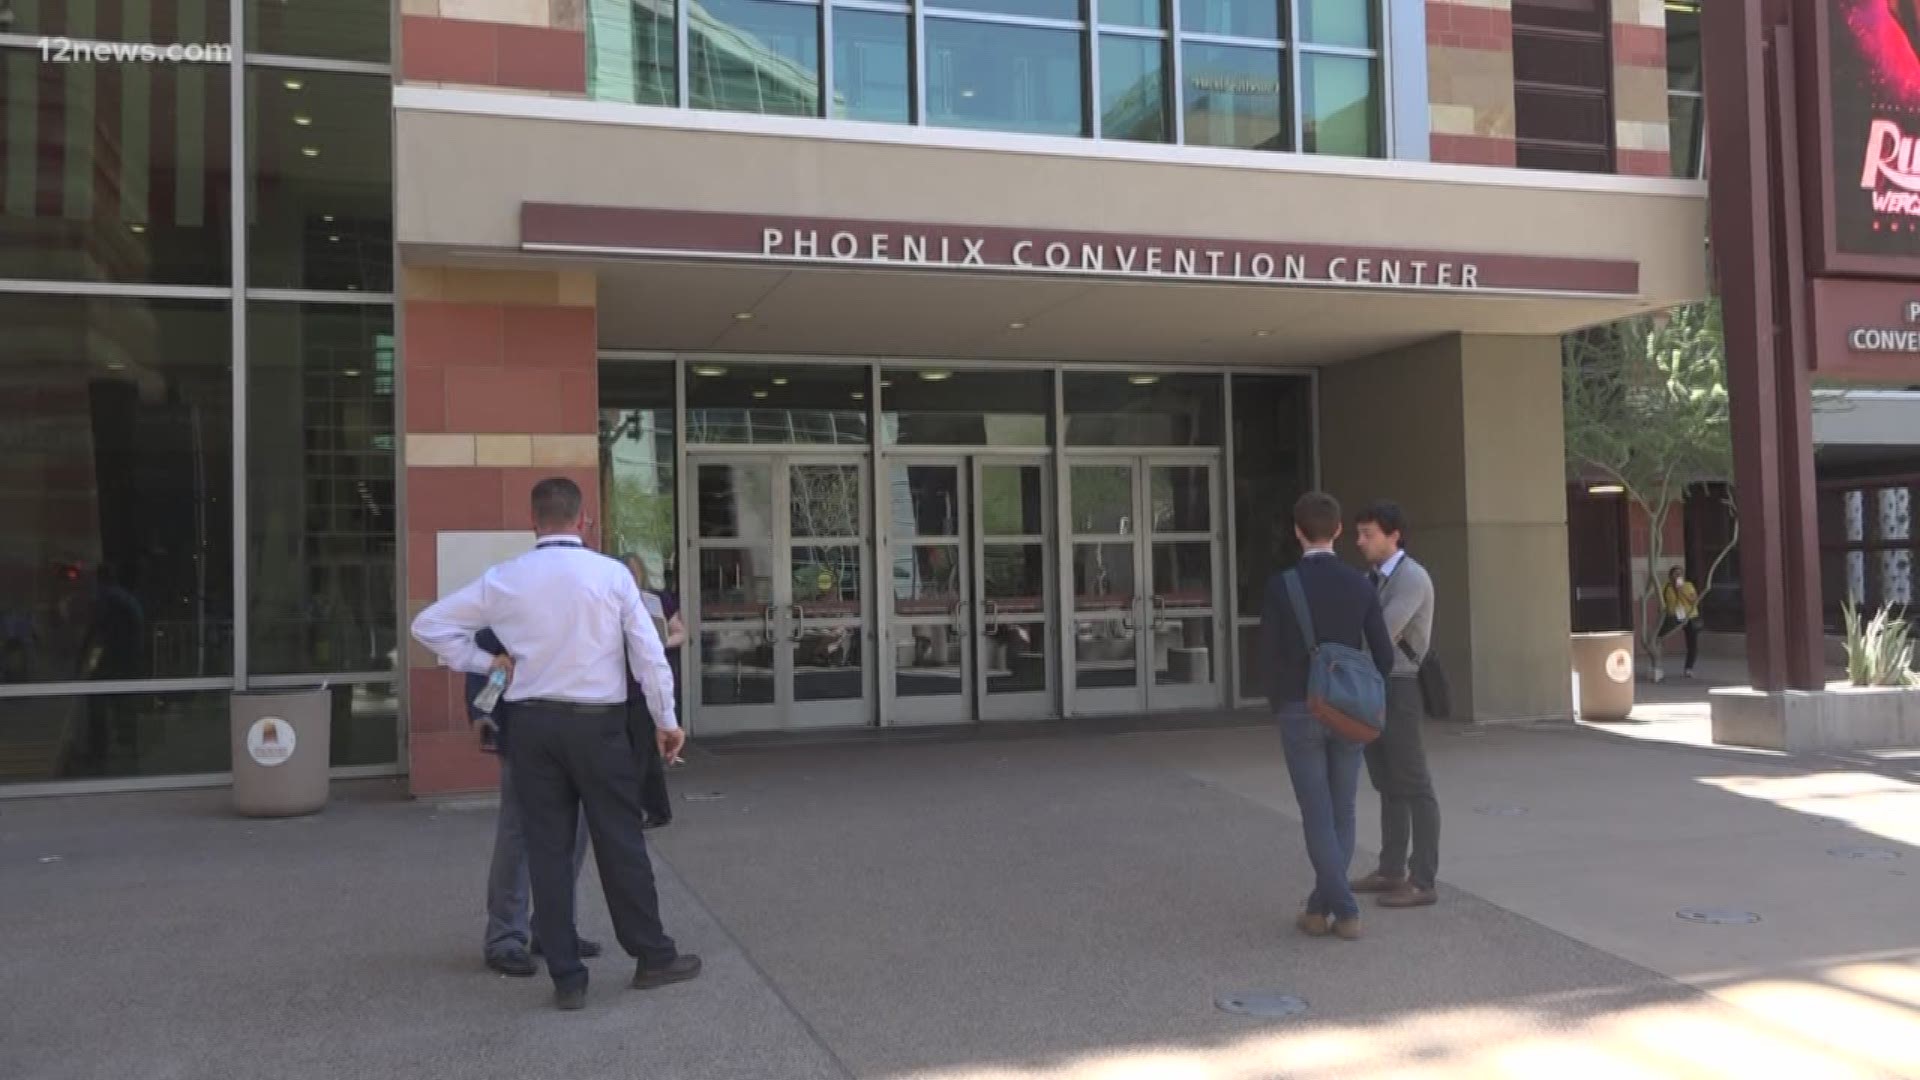 1400 Homeland Security and Emergency Management professionals from around the country are in Phoenix this week to discuss active shooter and terrorist situations. The conference is restricting traffic from 7 am to 9 am Wednesday morning between Washington and Jefferson Streets for public safety exercises.